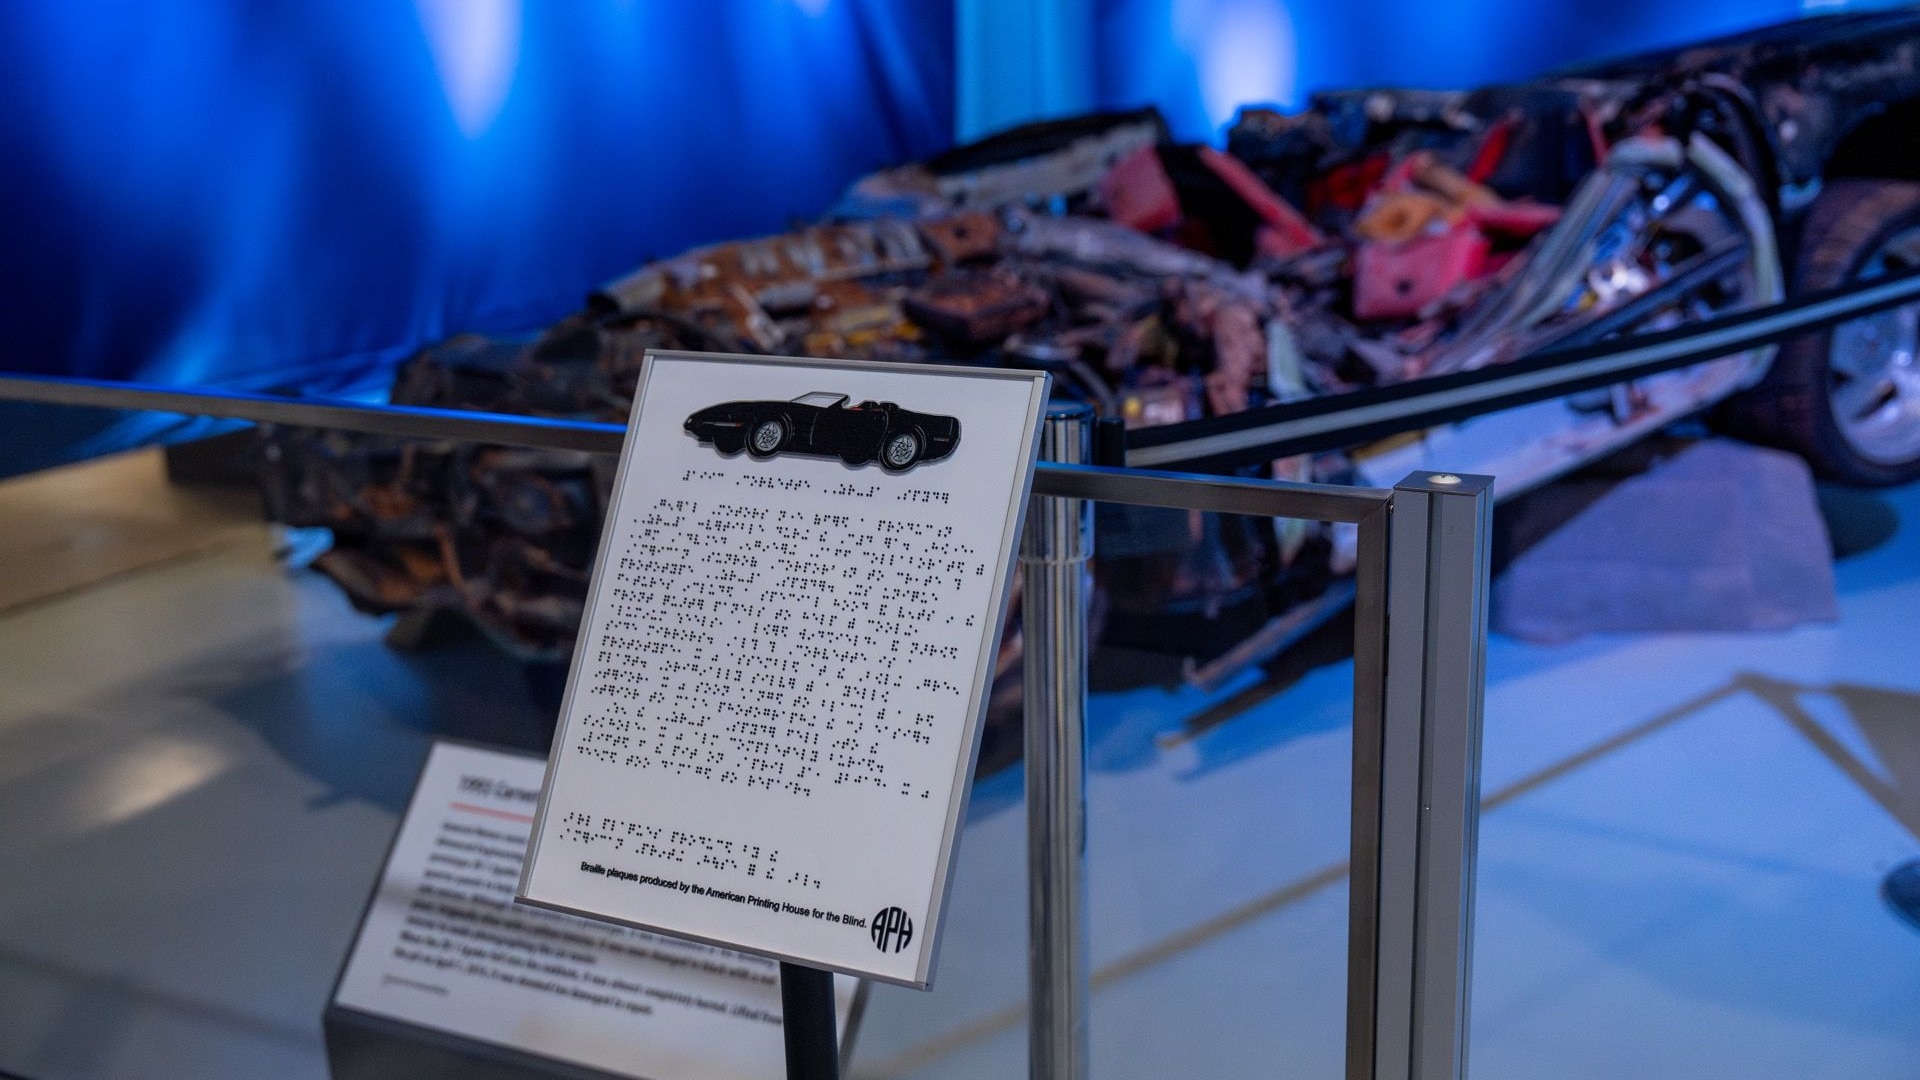 Corvettes rescued from a sinkhole in the Ground to Sky: The Sinkhole Reimagined exhibit